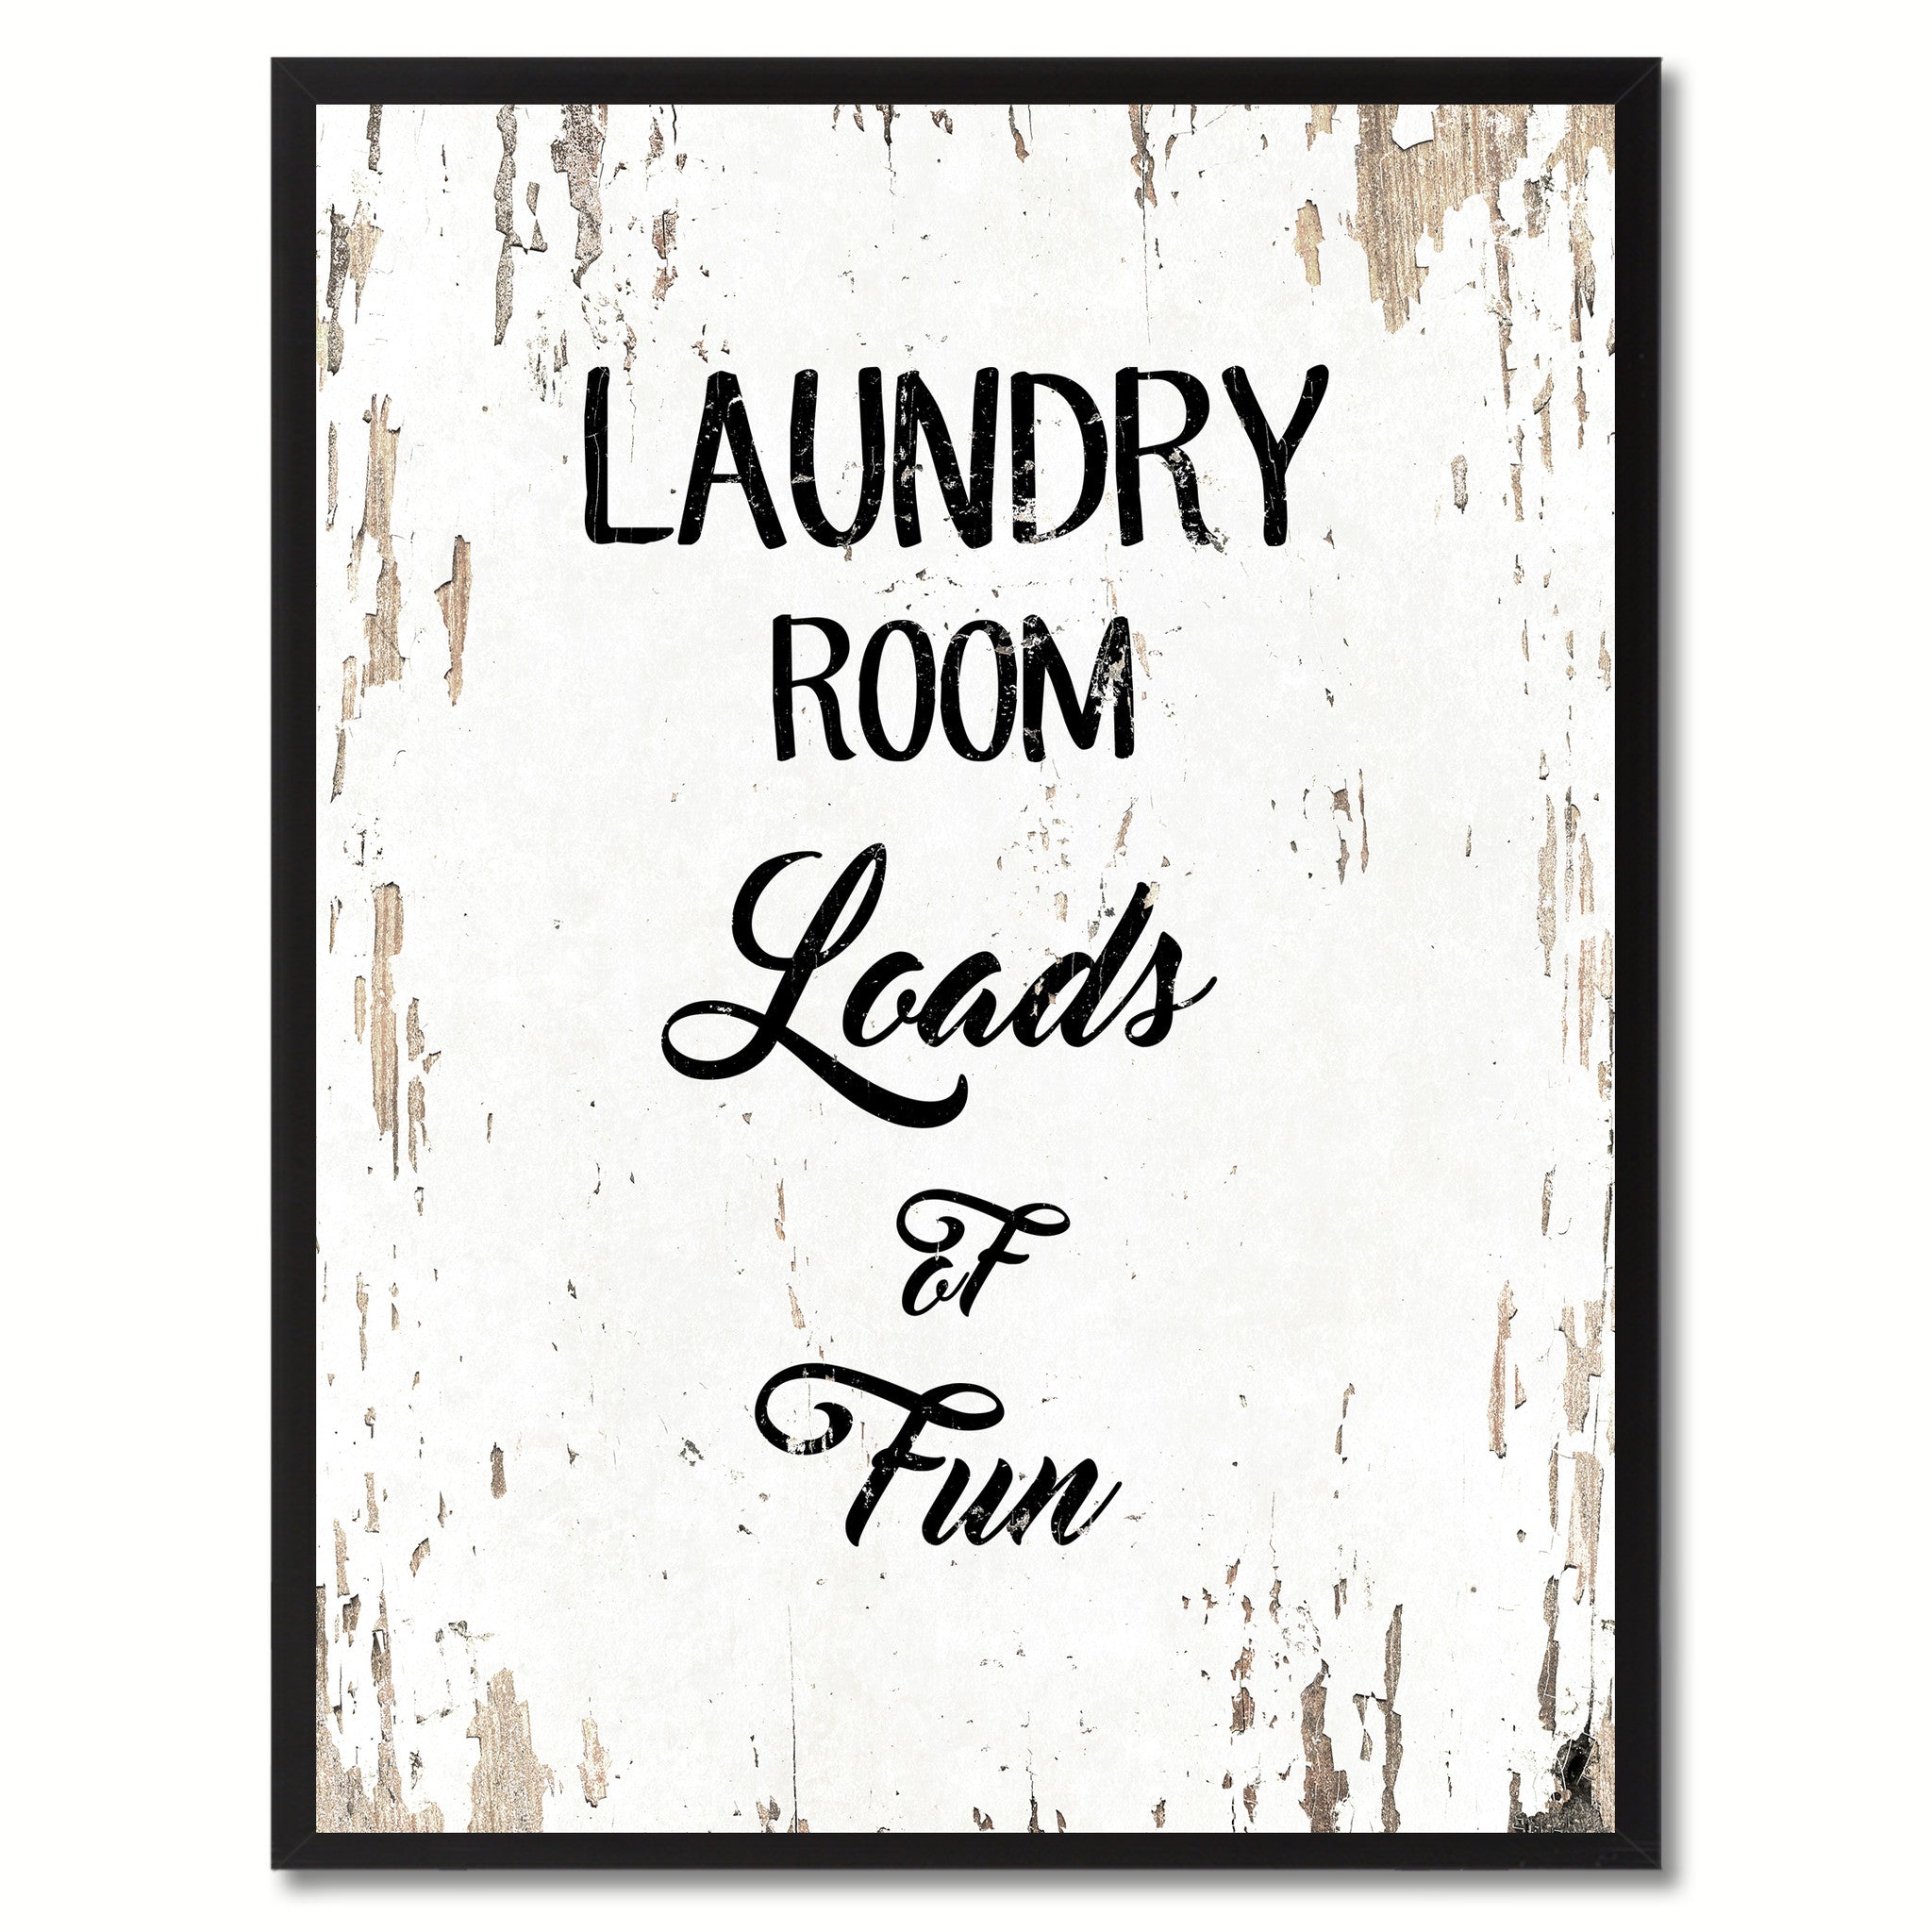 Laundry room loads of fun Funny Quote Saying Gift Ideas Home Decor Wall Art